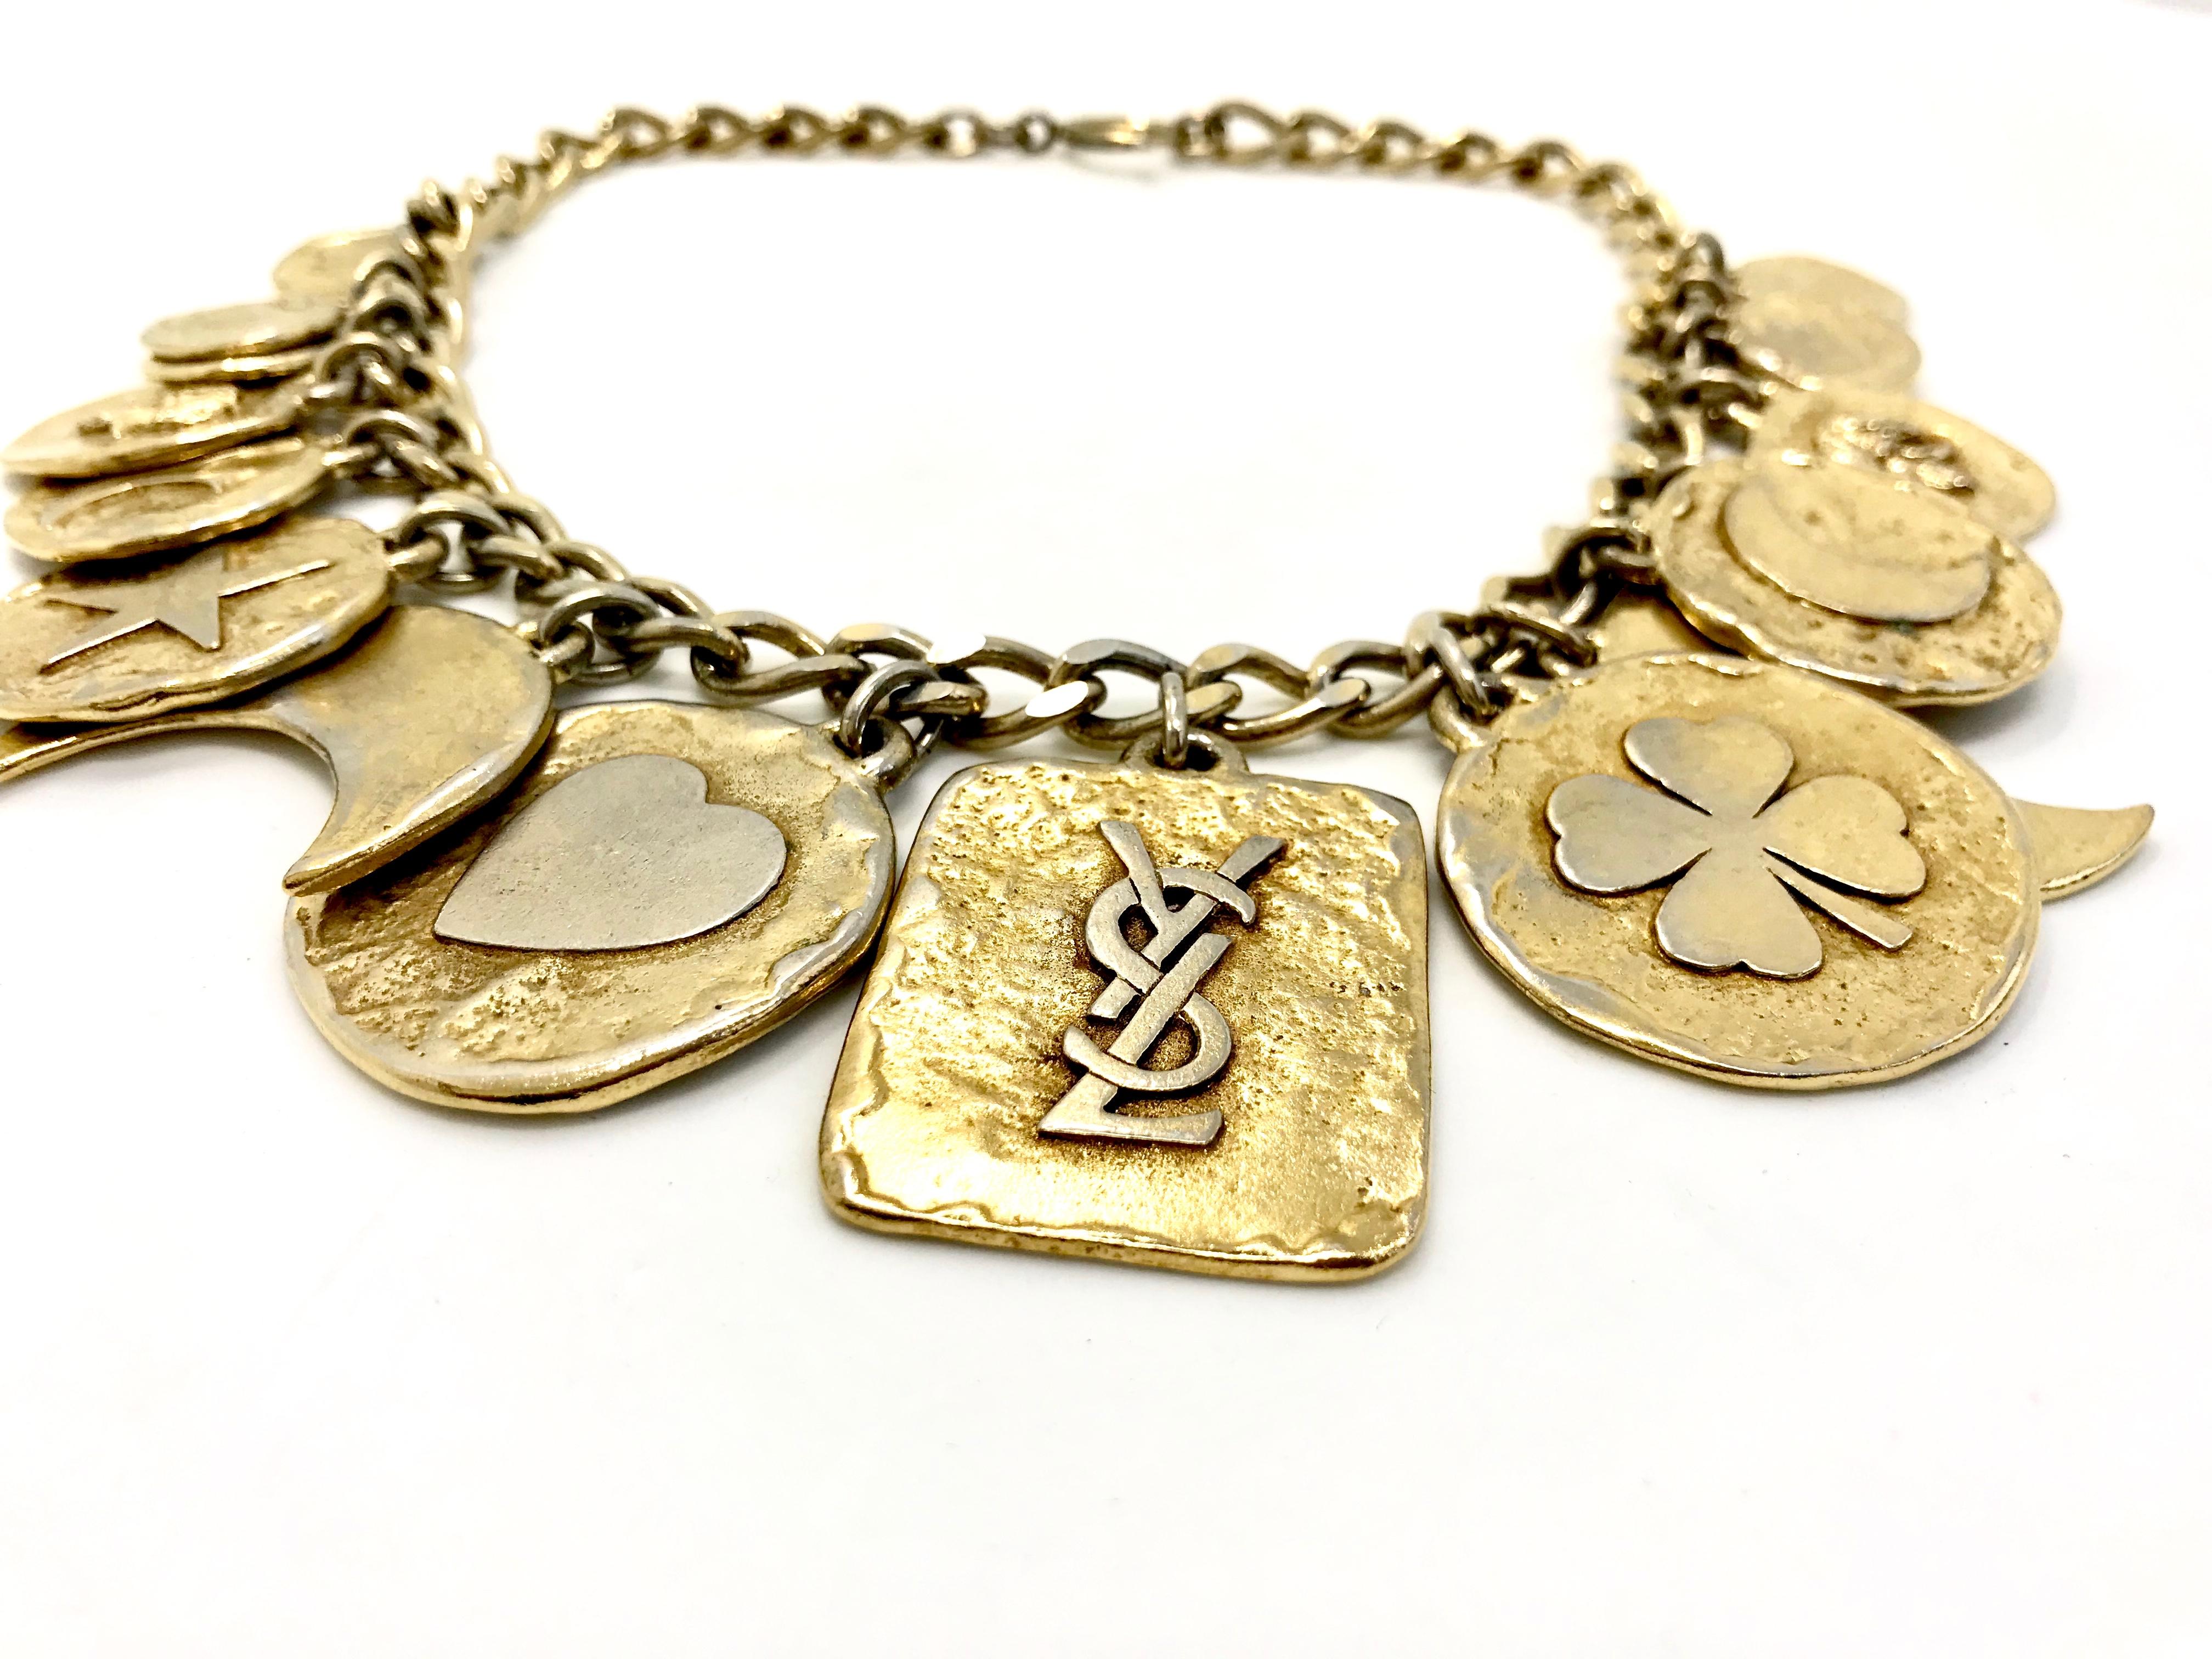 Iconic YSL /  Yves Saint Laurent 1980s vintage charm necklace.  

Features heart, star, dove, lily, moon, clover charms - a real statement 80s YSL piece for the discerning collector.

Main YSL- tag on necklace measures 4 by 3.7cms, so the